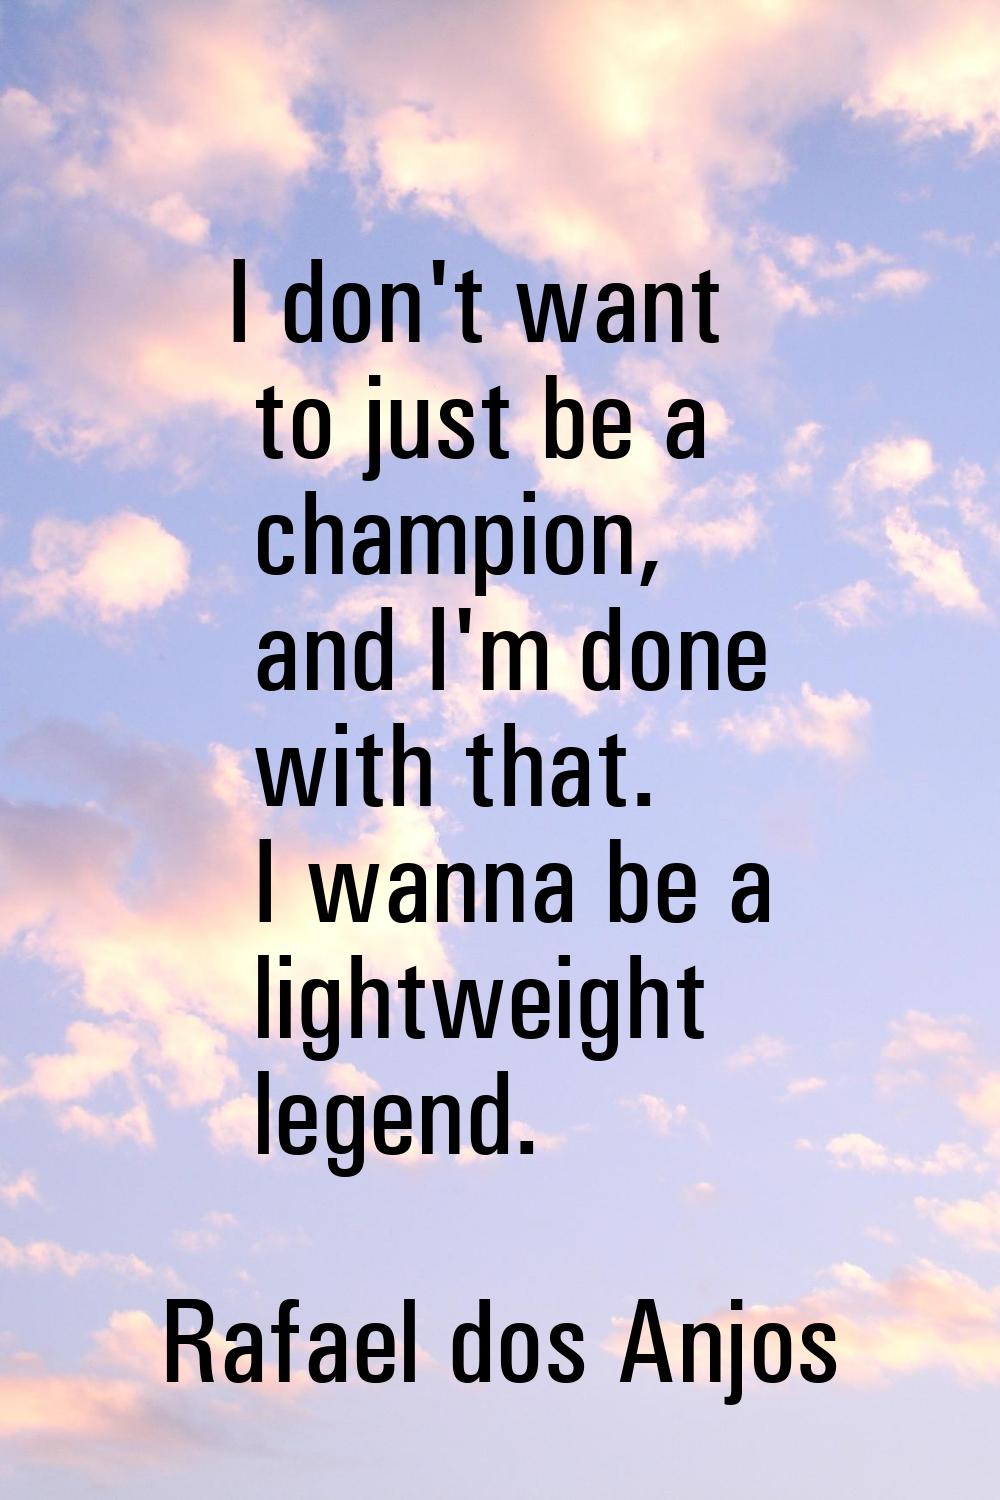 I don't want to just be a champion, and I'm done with that. I wanna be a lightweight legend.